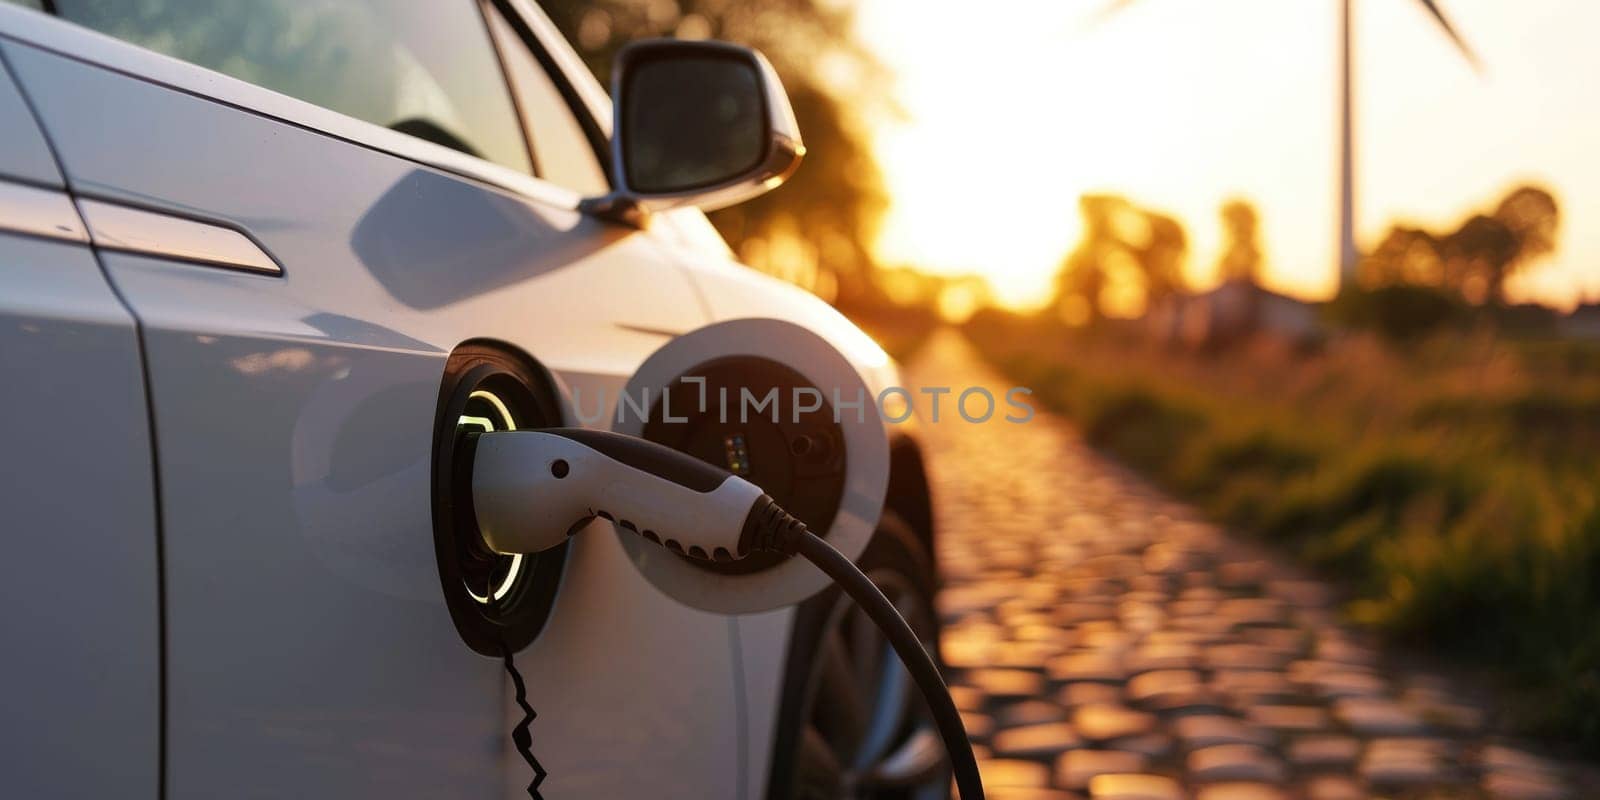 A picture about the electric vehicle that has been charging at the charging station and has been connected with the charger that has been connecting to the electric vehicle to become new tech. AIGX01.